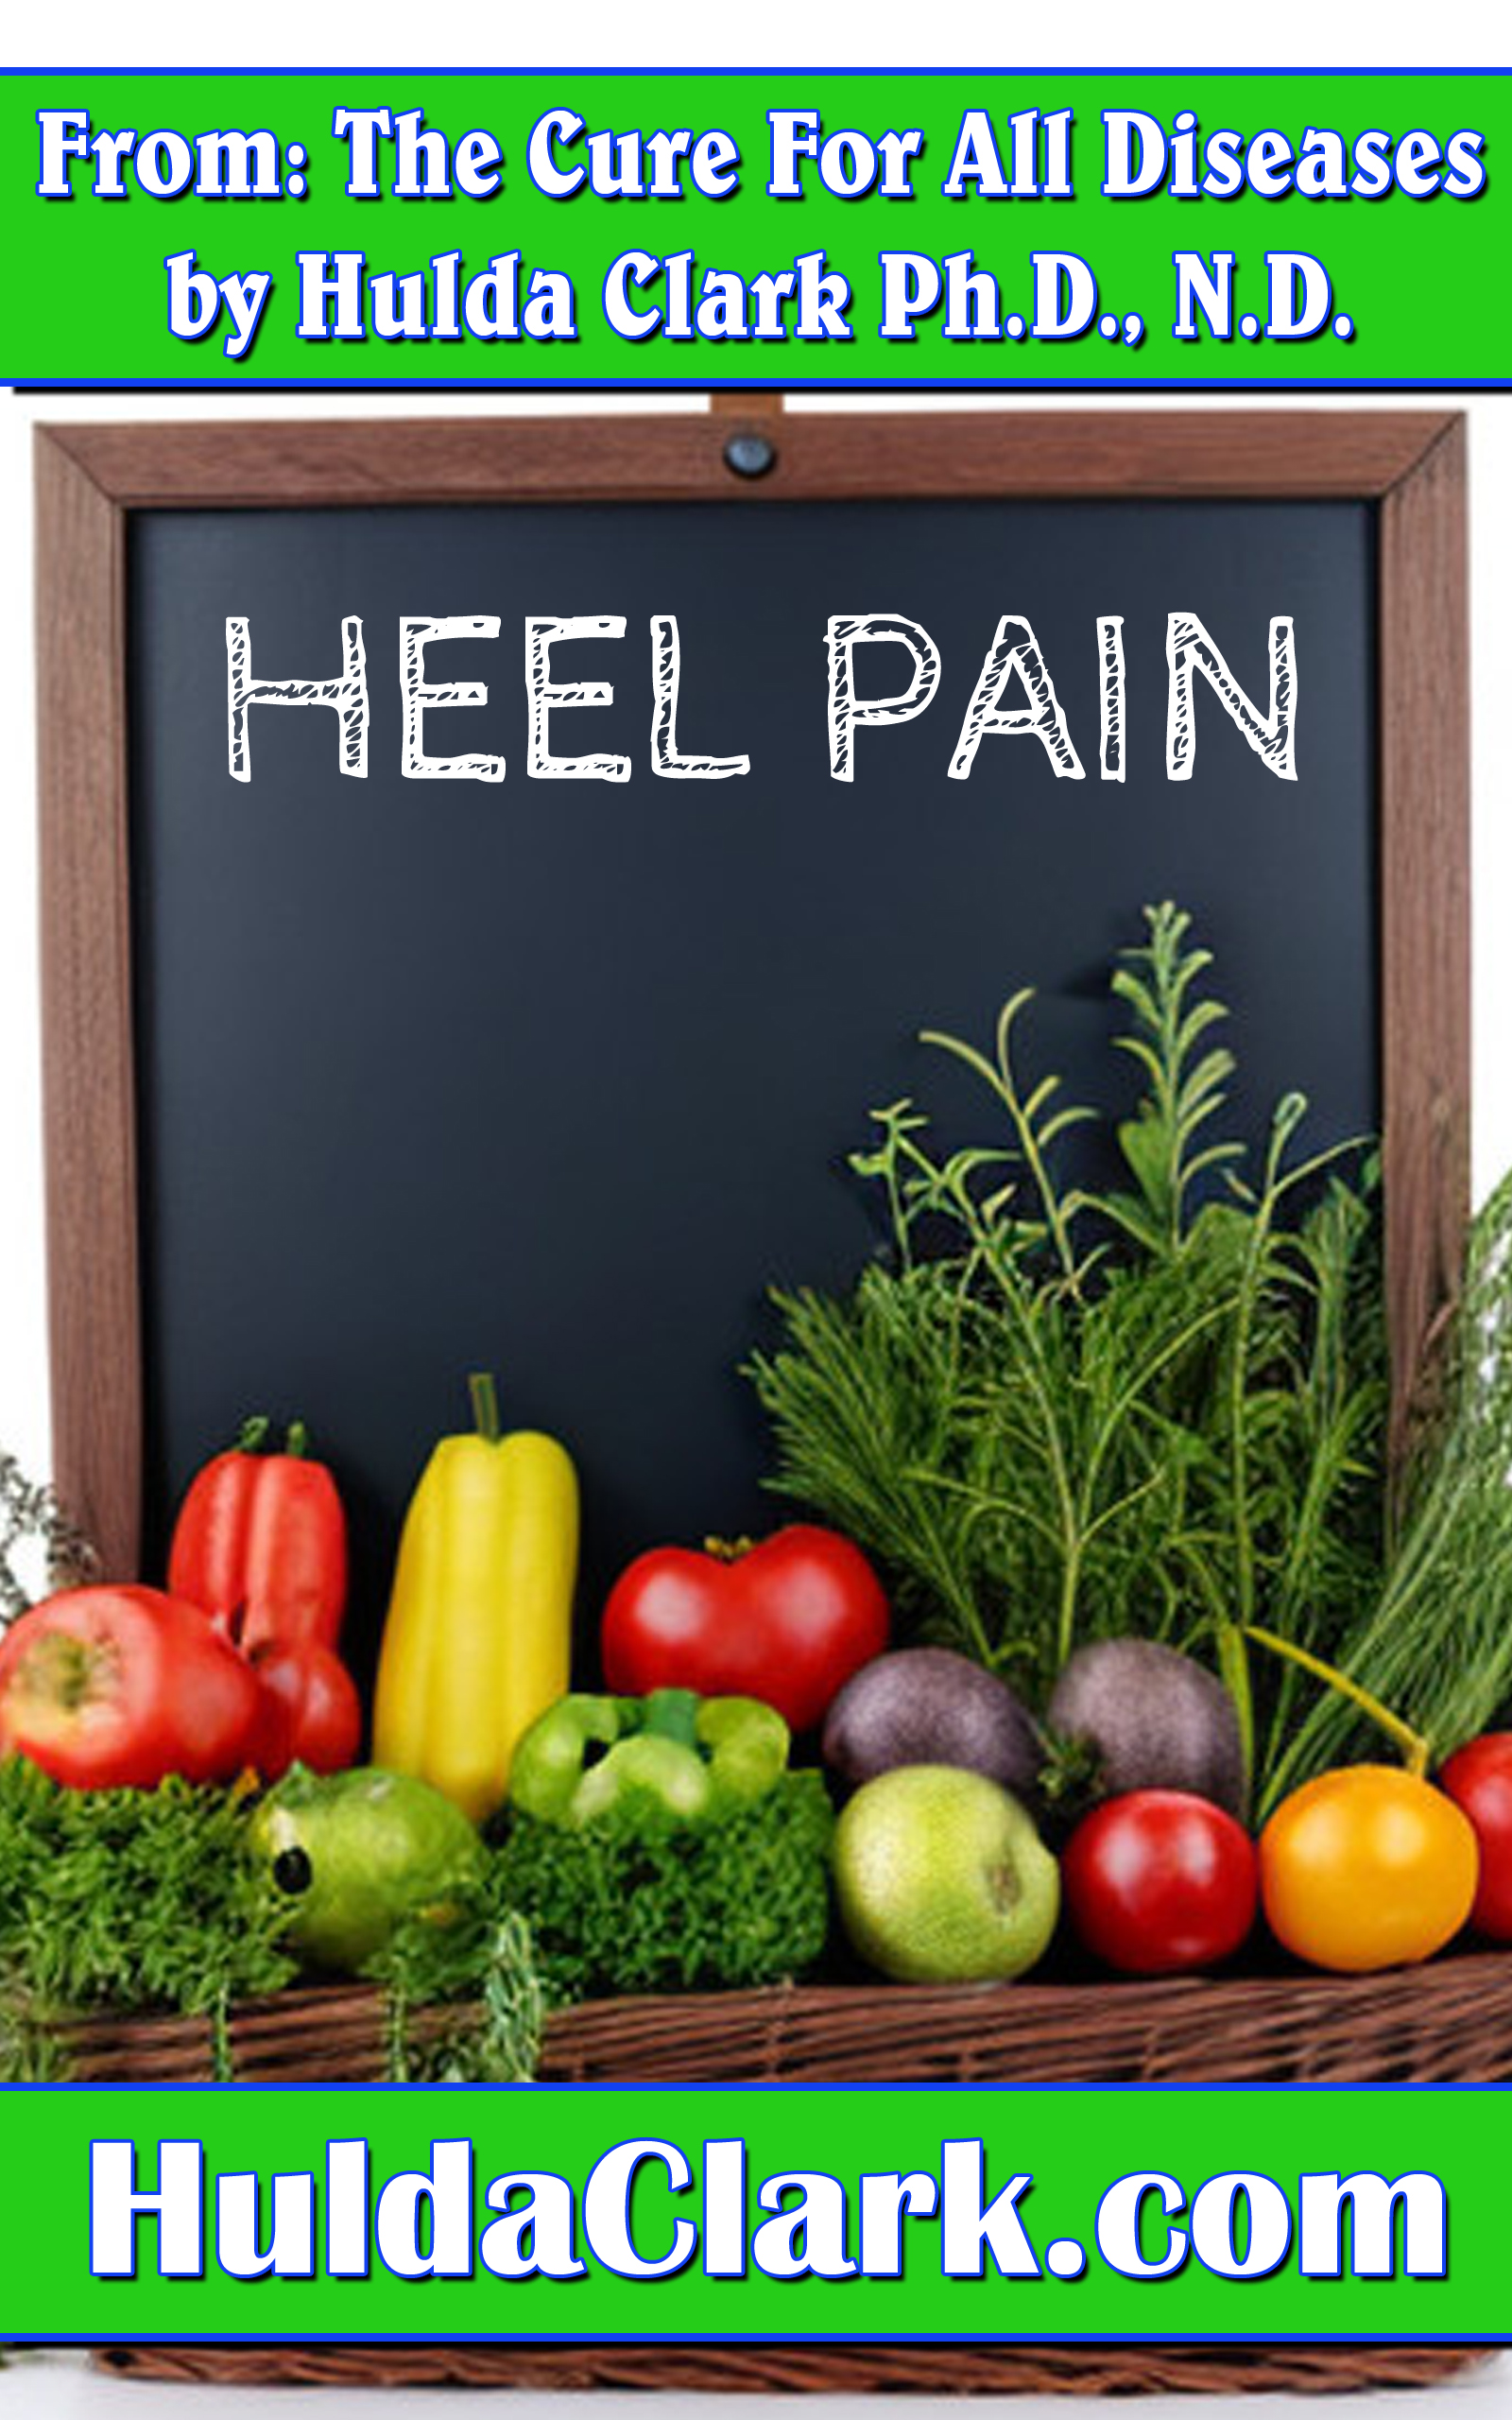 Heel Pain Ebook excerpt from The Cure for All Diseases by Hulda Clark